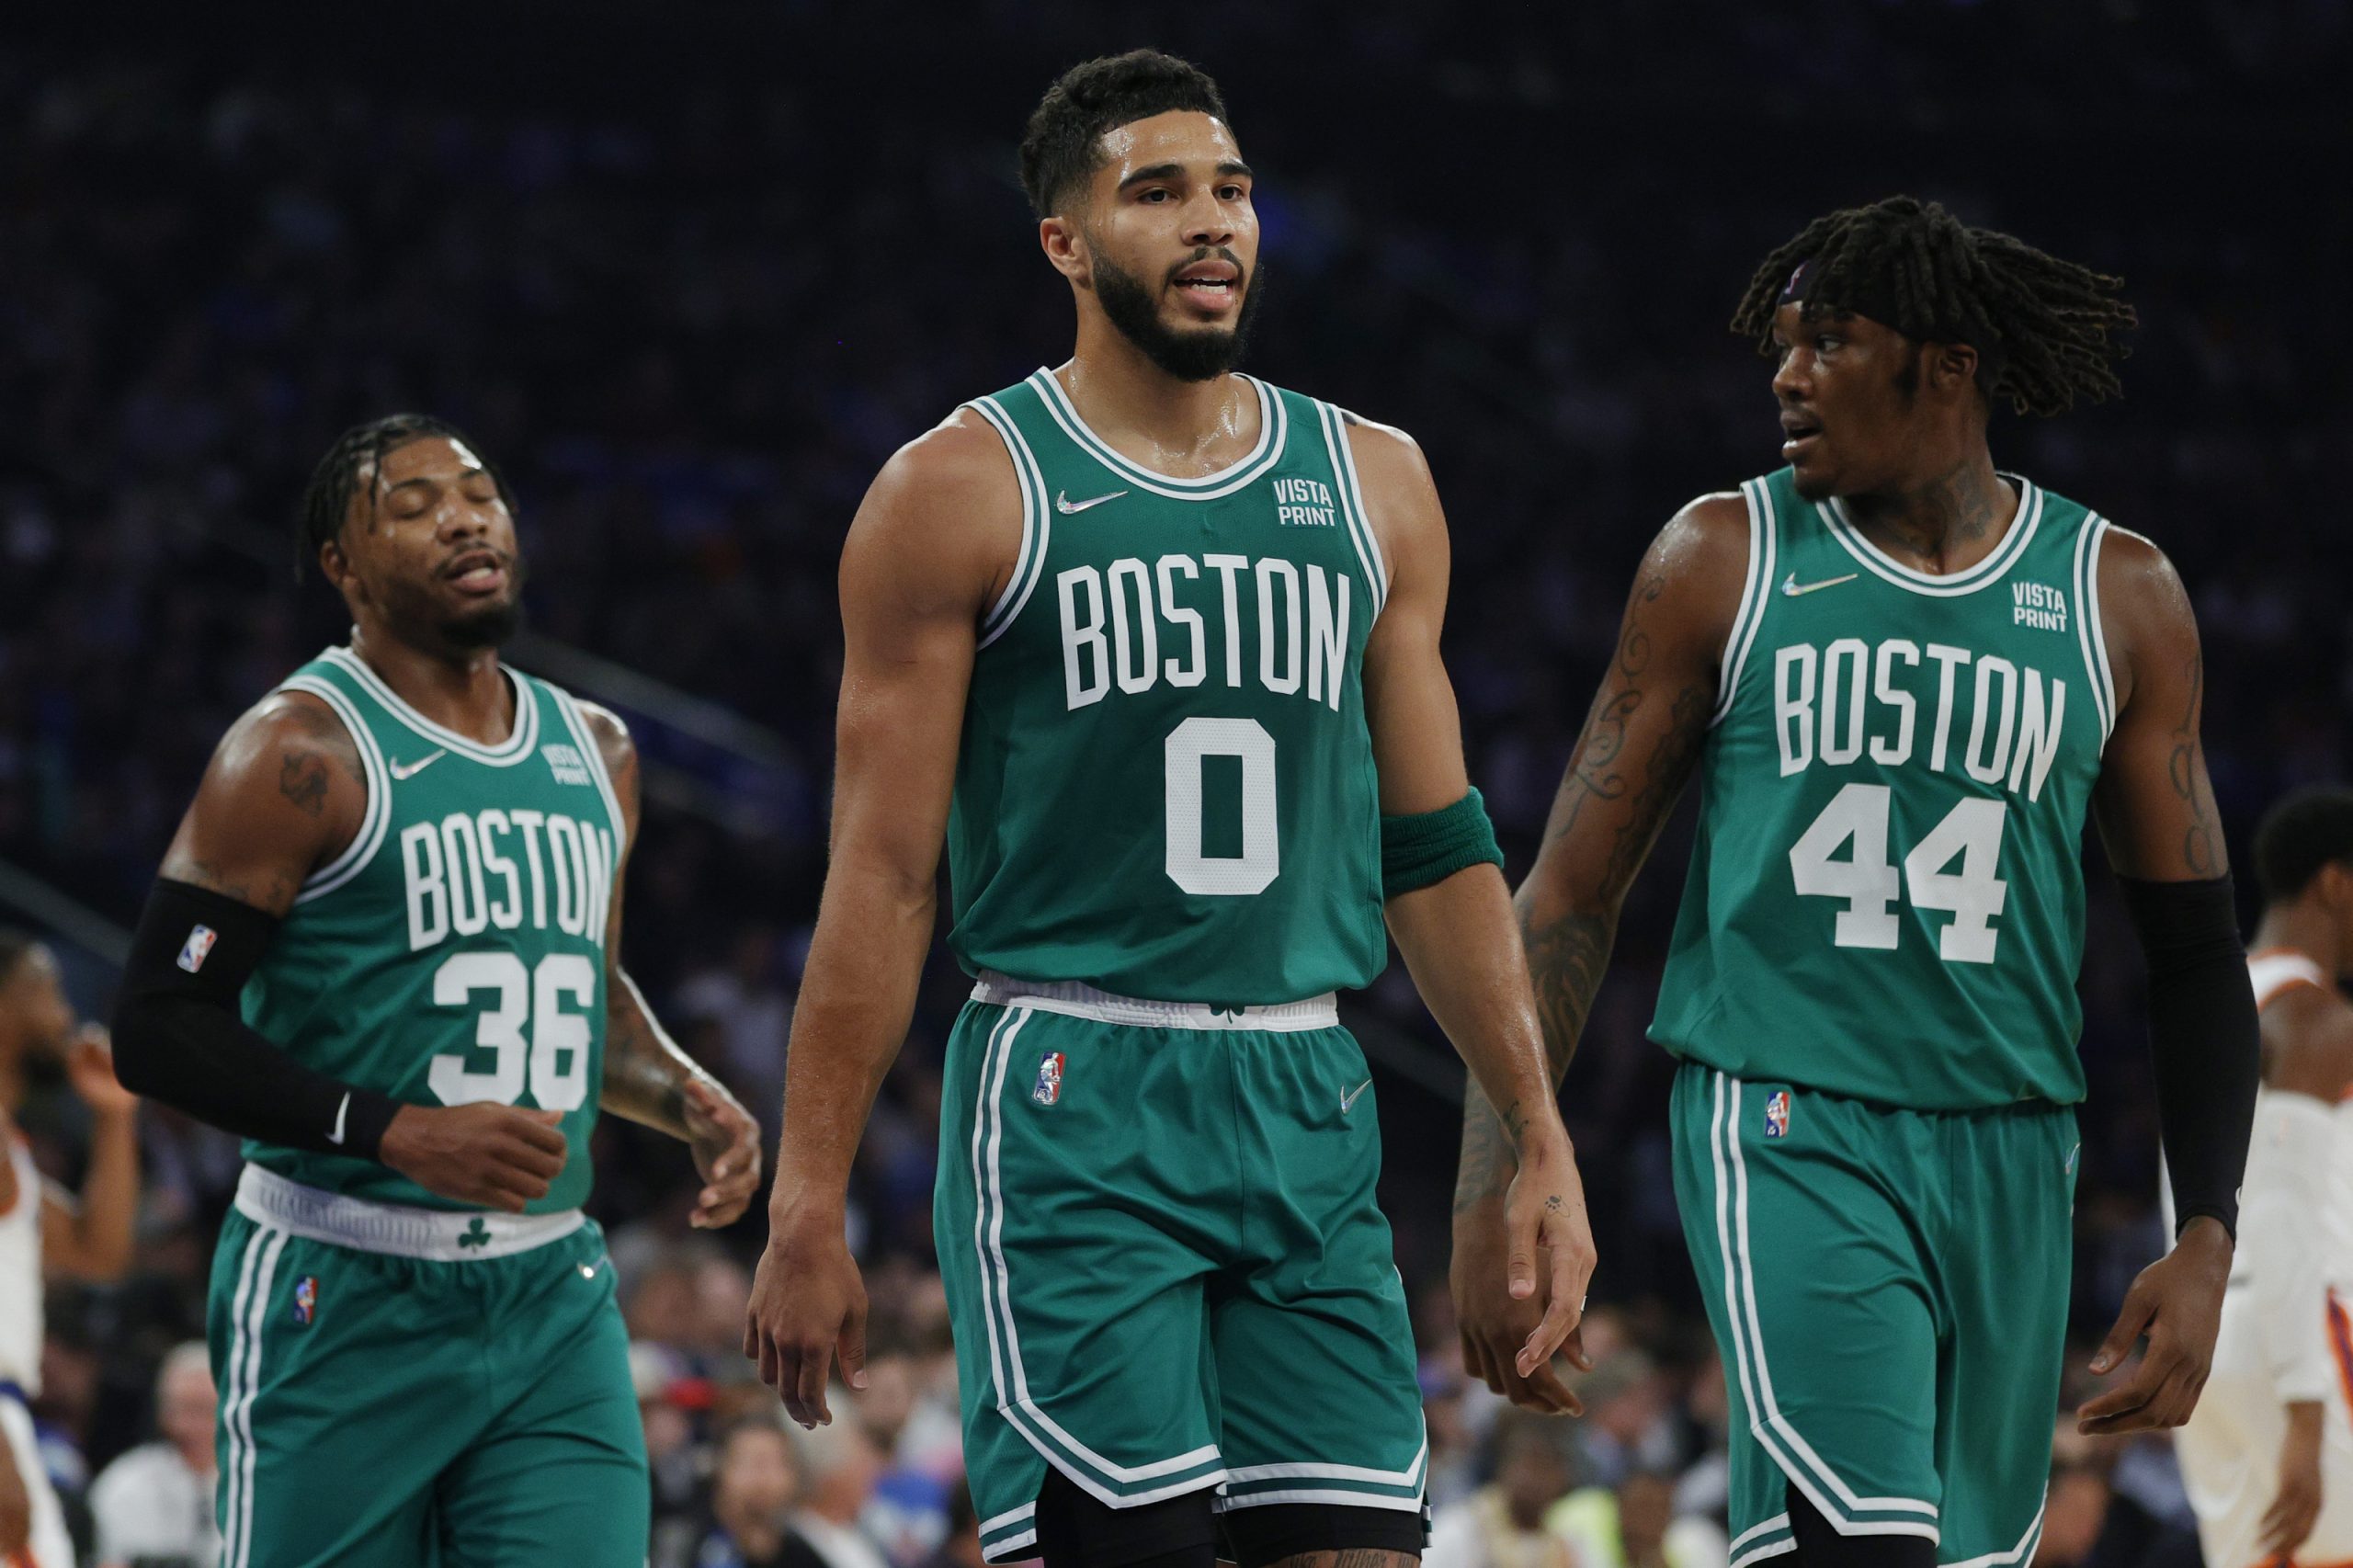 Boston Celtics continue their good form as they blow out the Minnesota Timberwolves